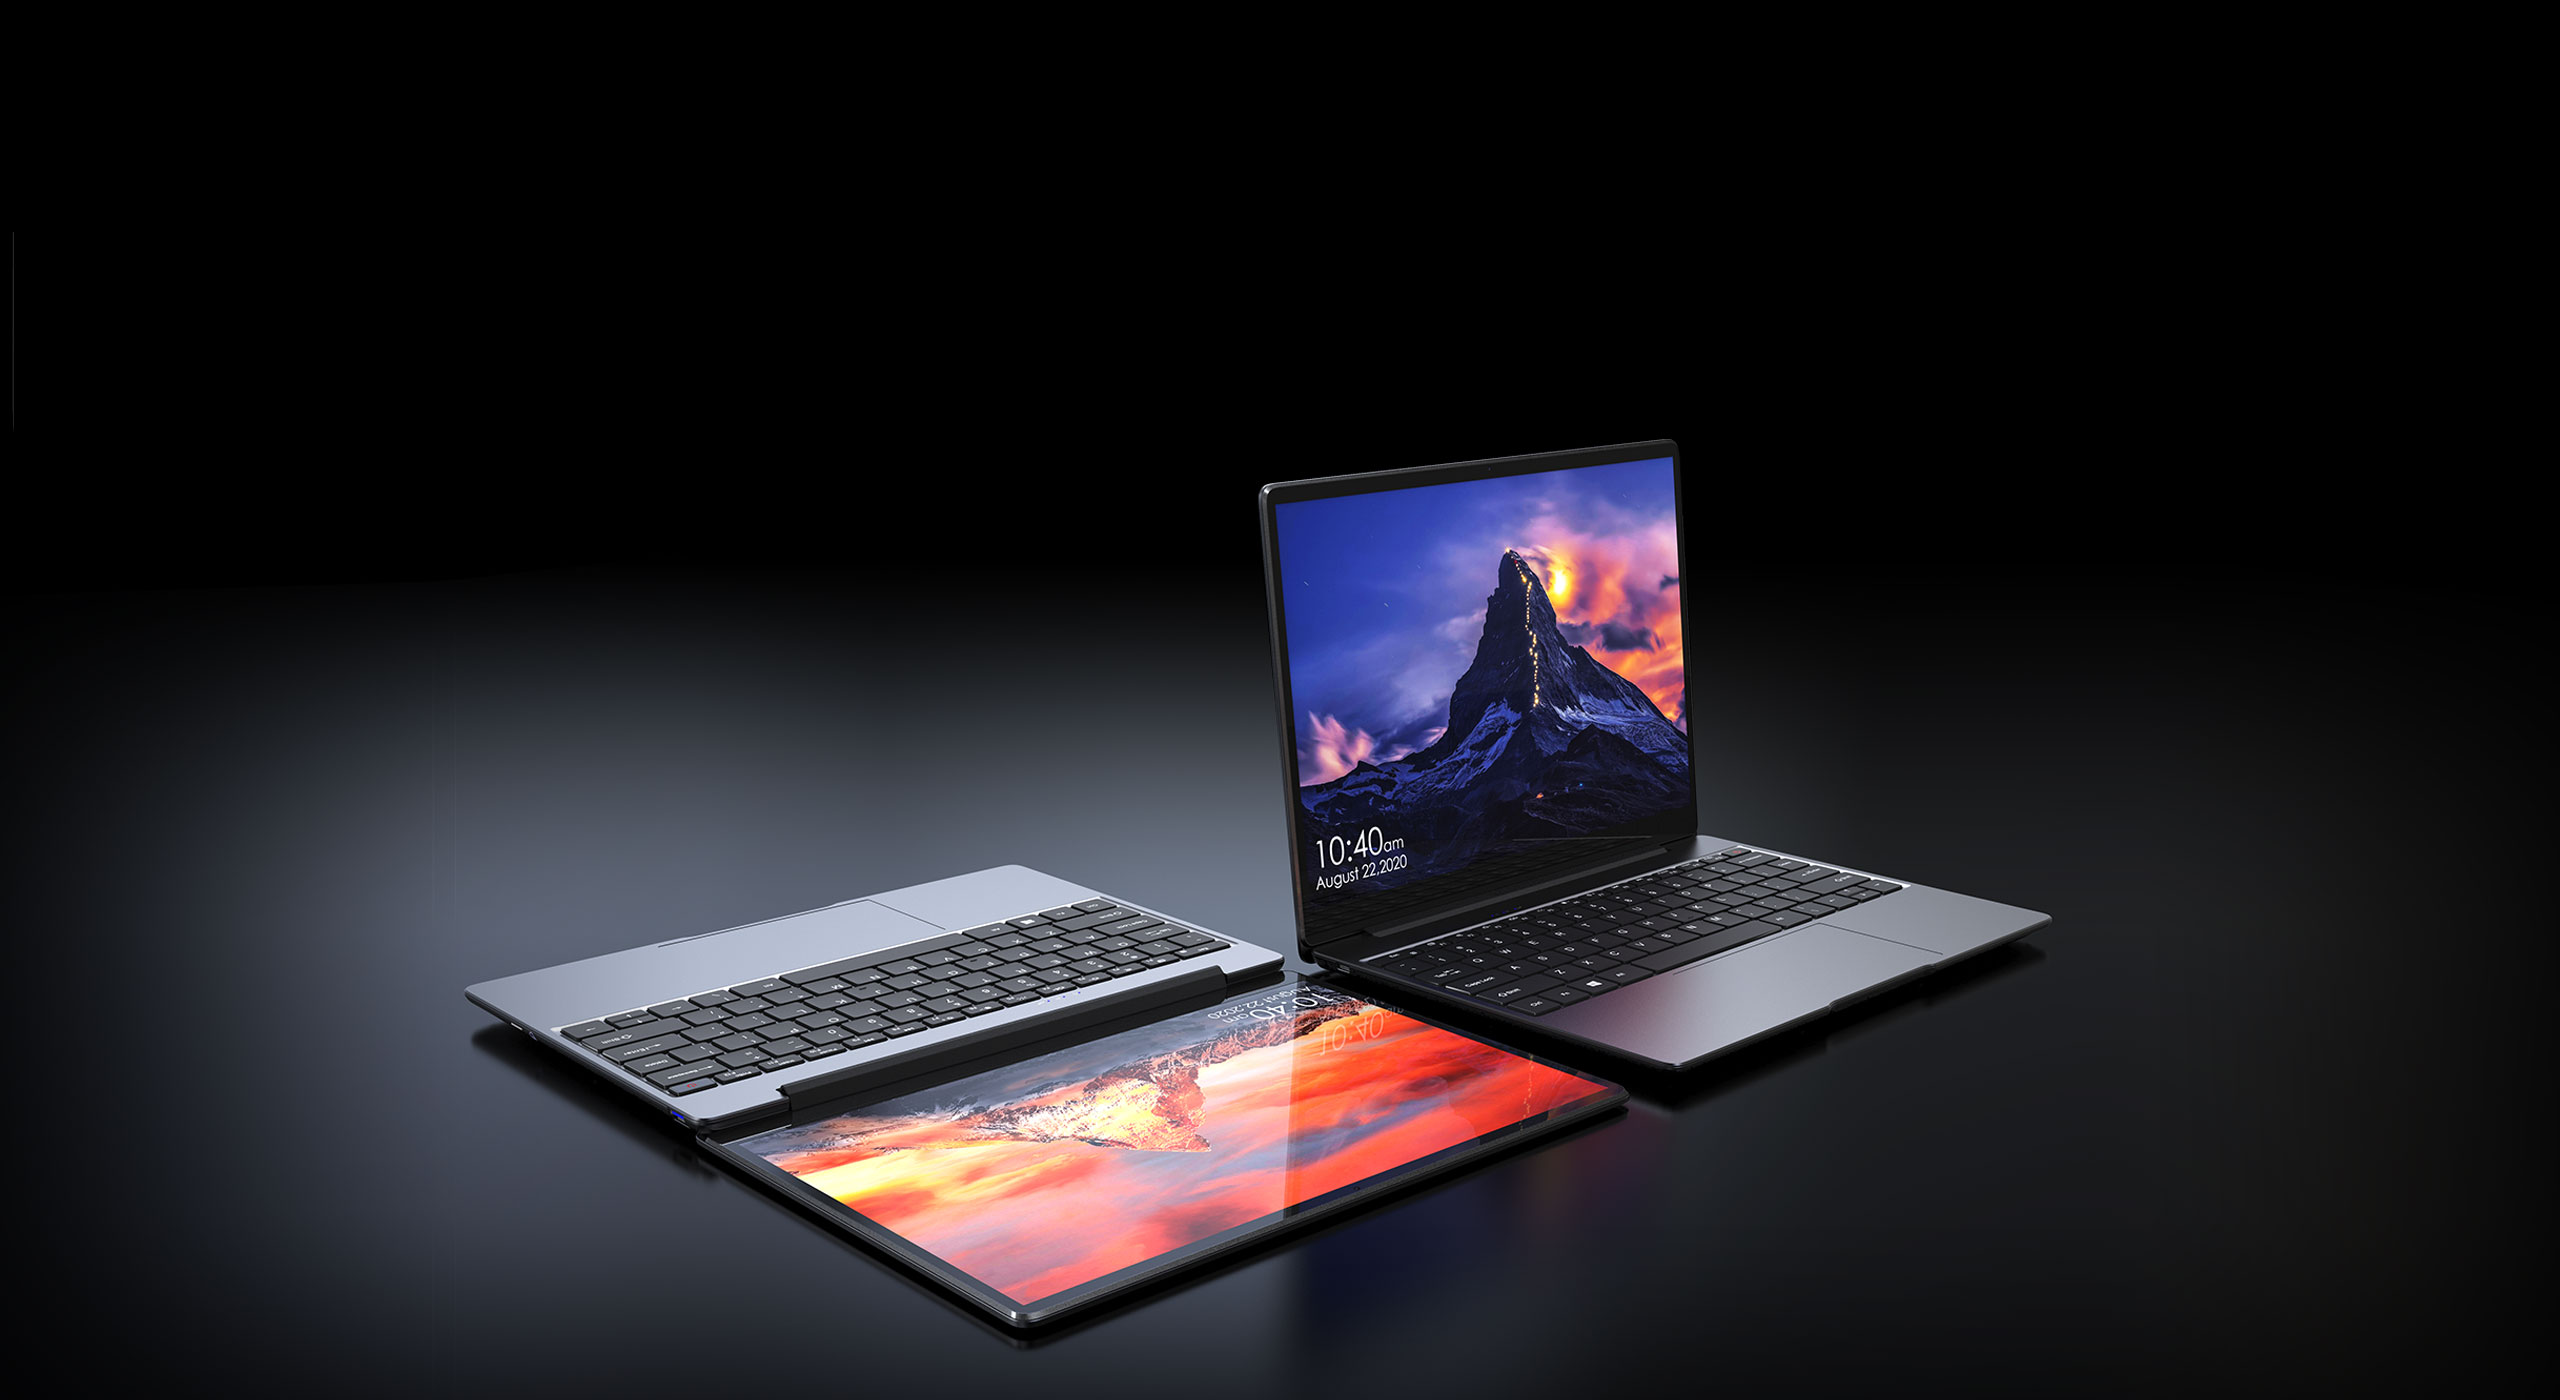 Chuwi GemiBook Pro refreshed with an Intel Jasper Lake processor and a  14-inch display - NotebookCheck.net News